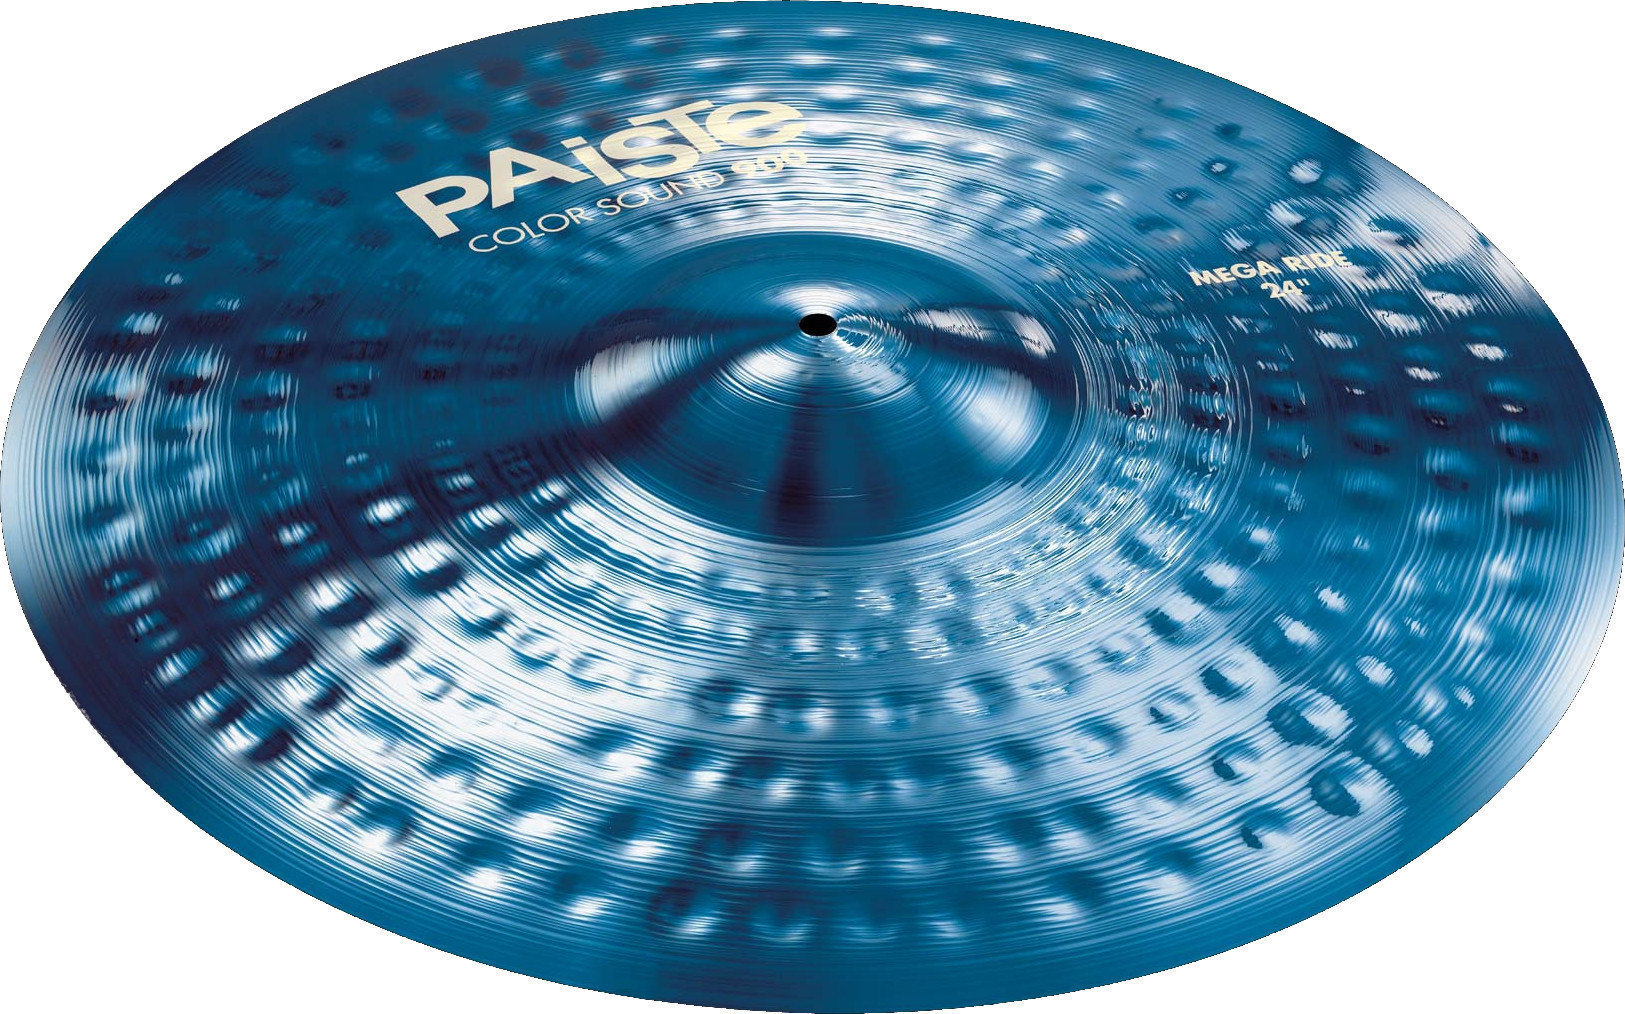 Ride Cymbal Paiste Color Sound 900  Mega Ride Cymbal 24" Blue